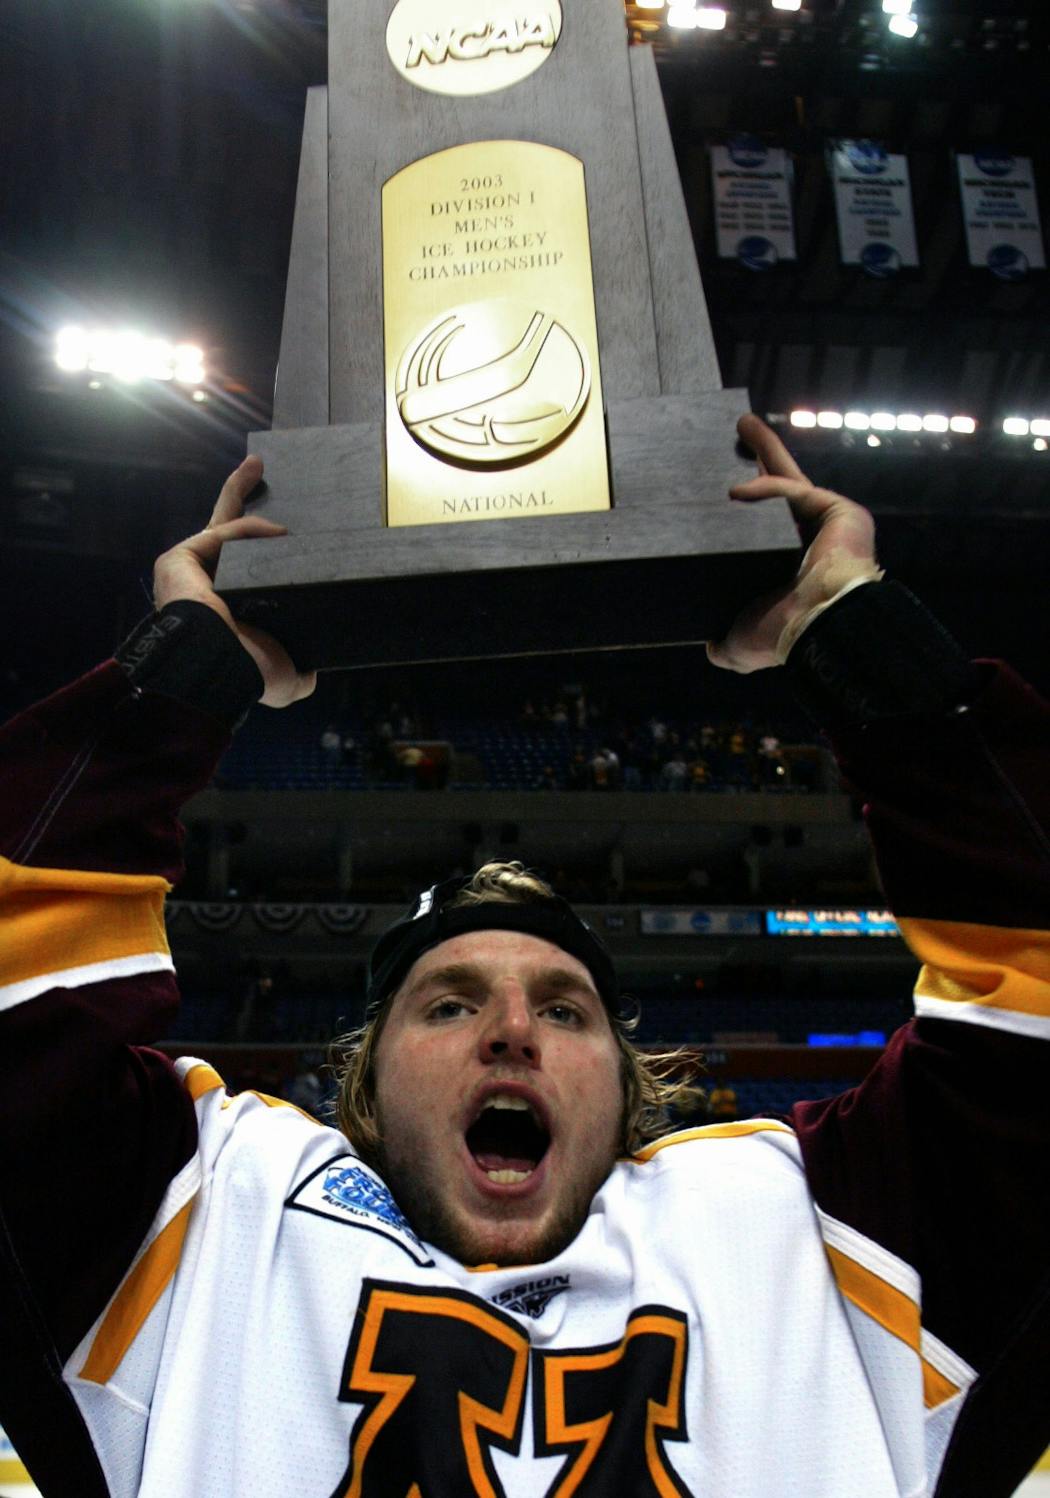 Then-freshman Thomas Vanek celebrated with the 2003 men's Frozen Four trophy after the Gophers defeated New Hampshire for the NCAA championship.  Vanek was named the player of the game.